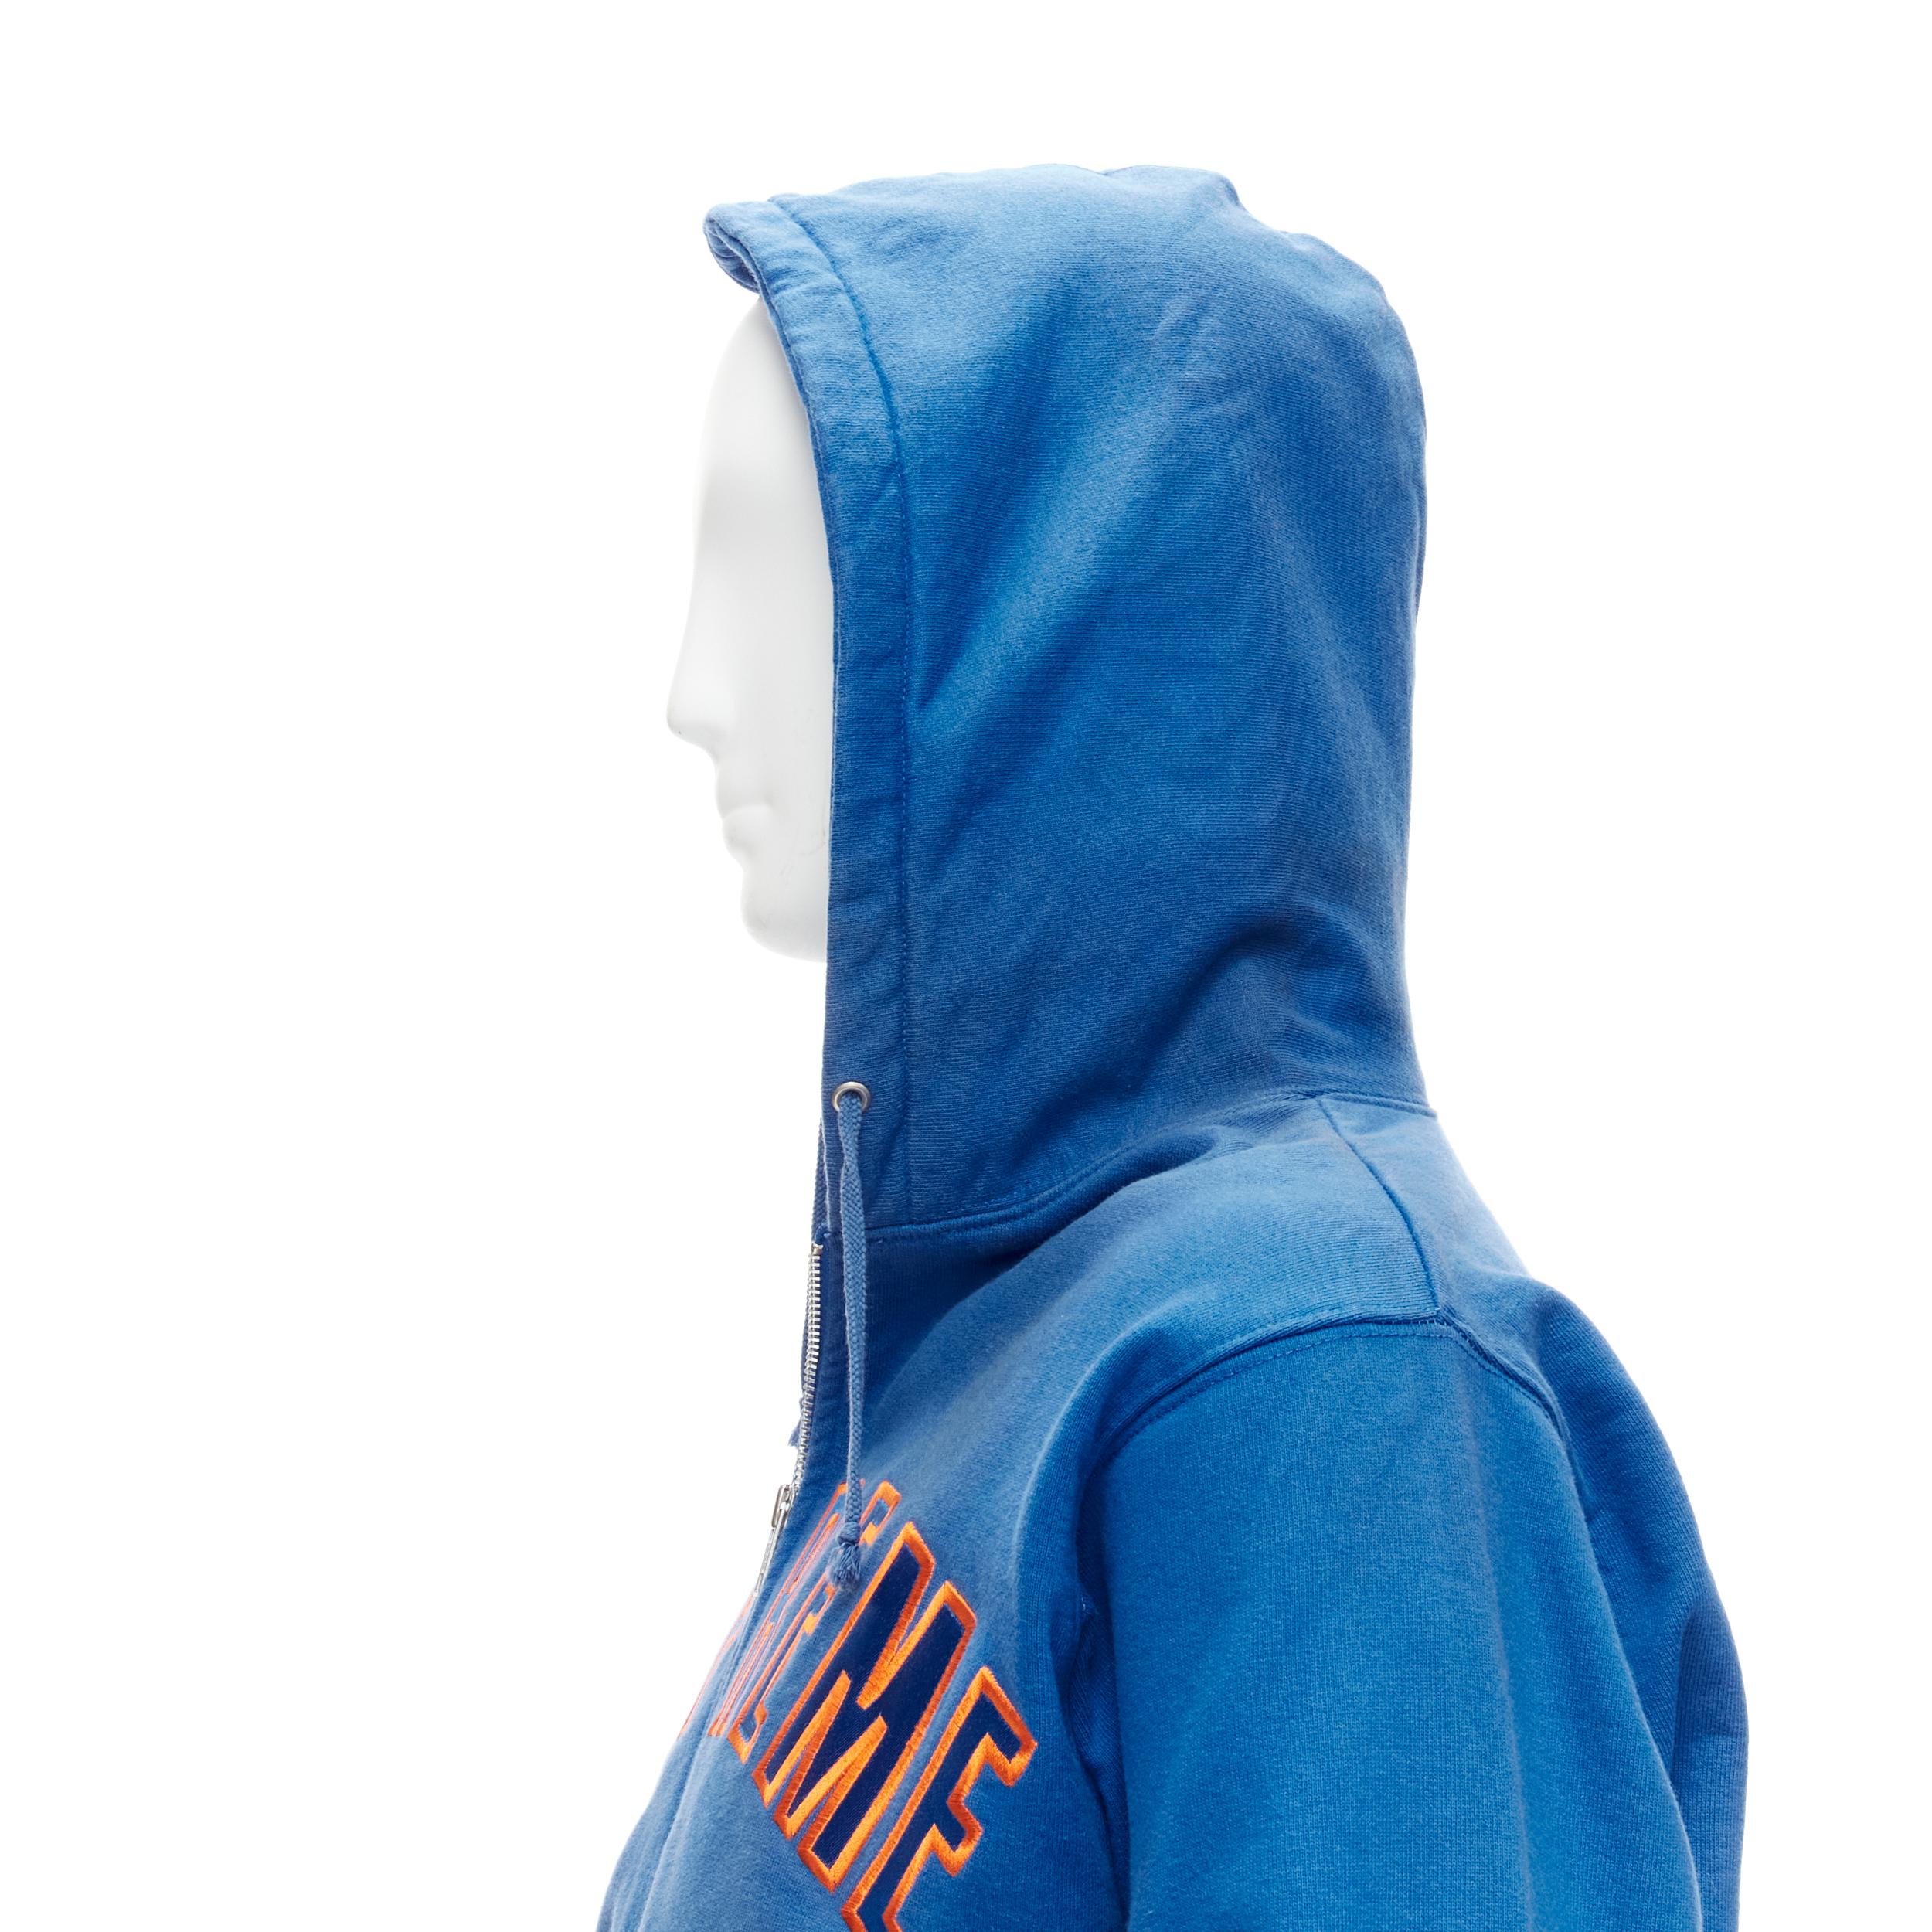 SUPREME blue orange satin embroidery logo zip up hoodie M
Reference: BMPA/A00246
Brand: Supreme
Material: Cotton, Blend
Color: Blue, Orange
Pattern: Solid
Closure: Zip
Made in: Canada

CONDITION:
Condition: Very good, this item was pre-owned and is